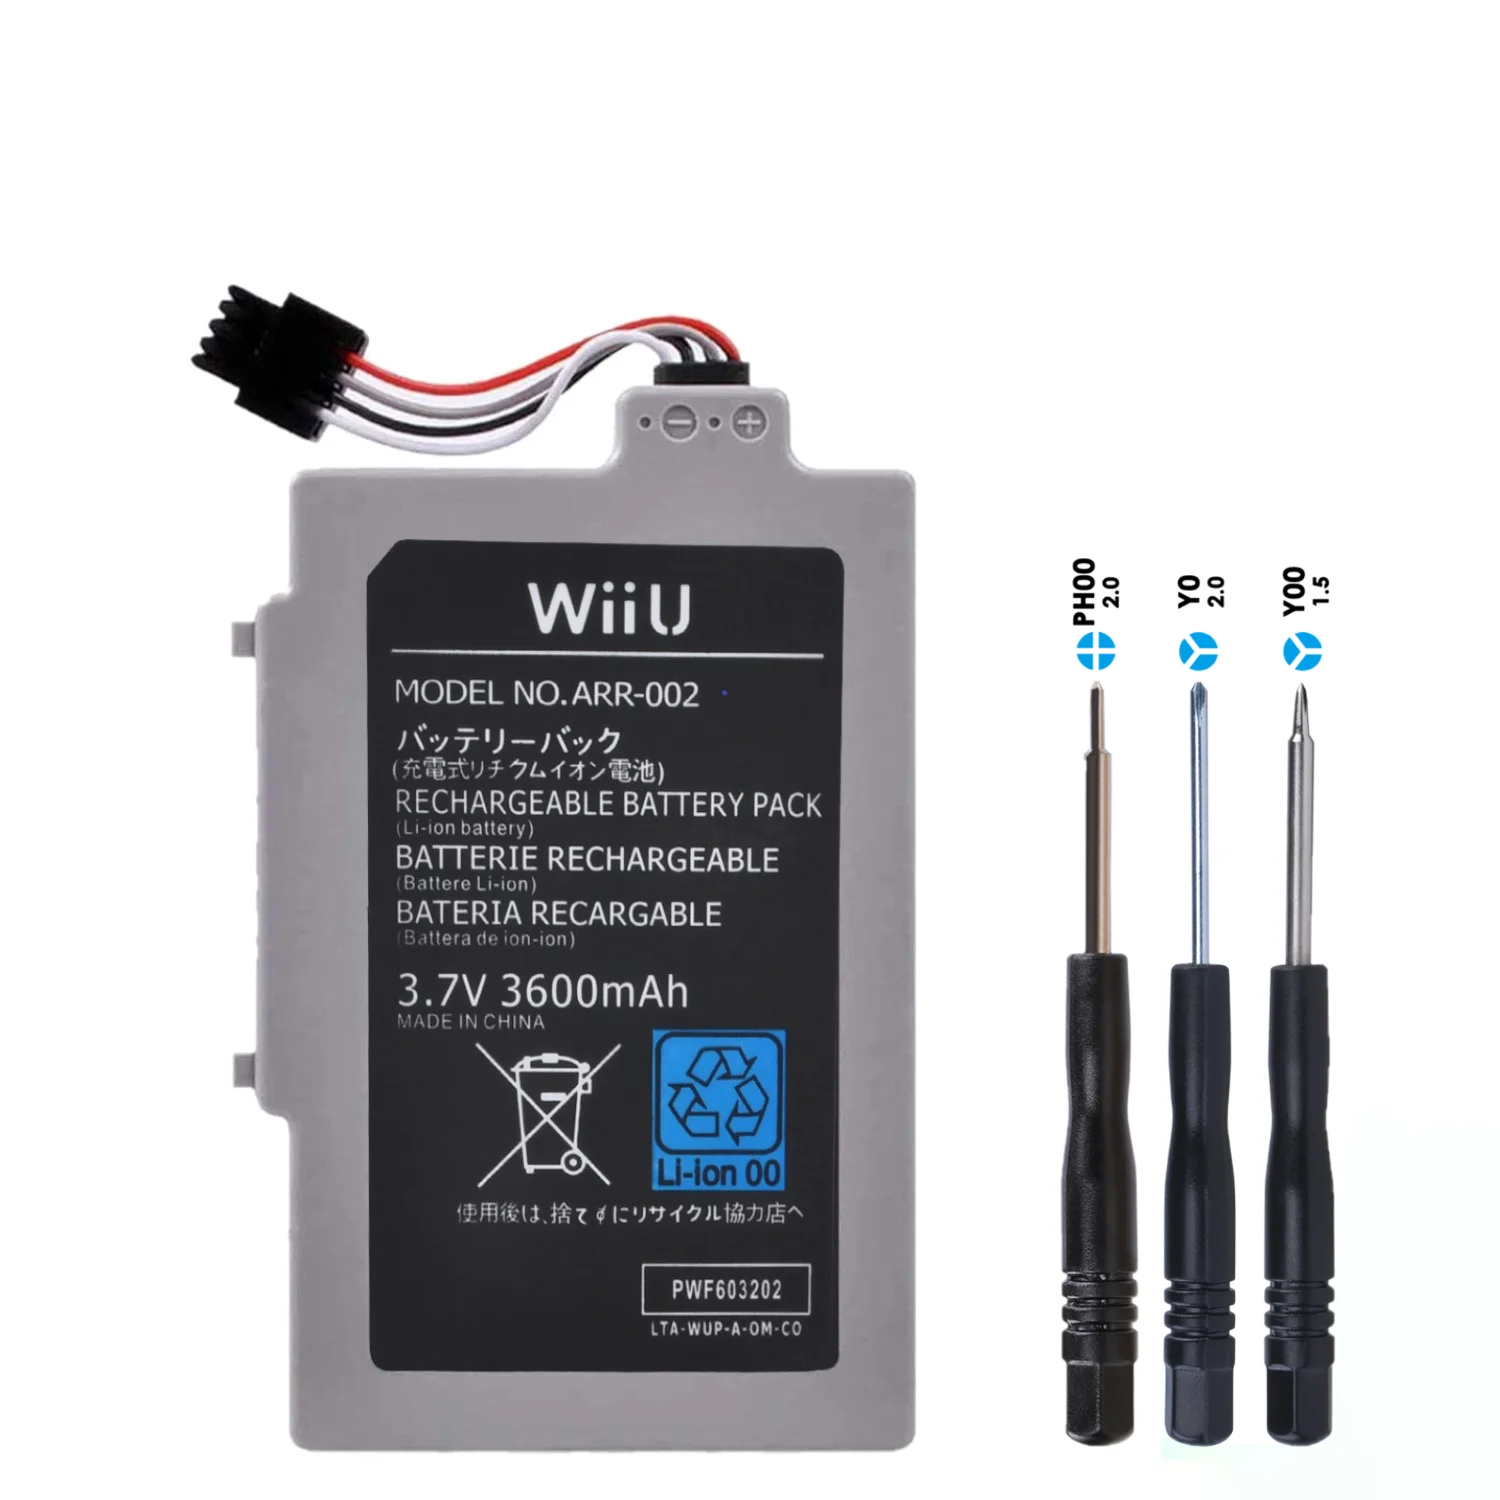 Batmax 3600mAh Rechargeable Battery Pack for Nintendo Wii U Gamepad Controller WUP-012, WUP-010